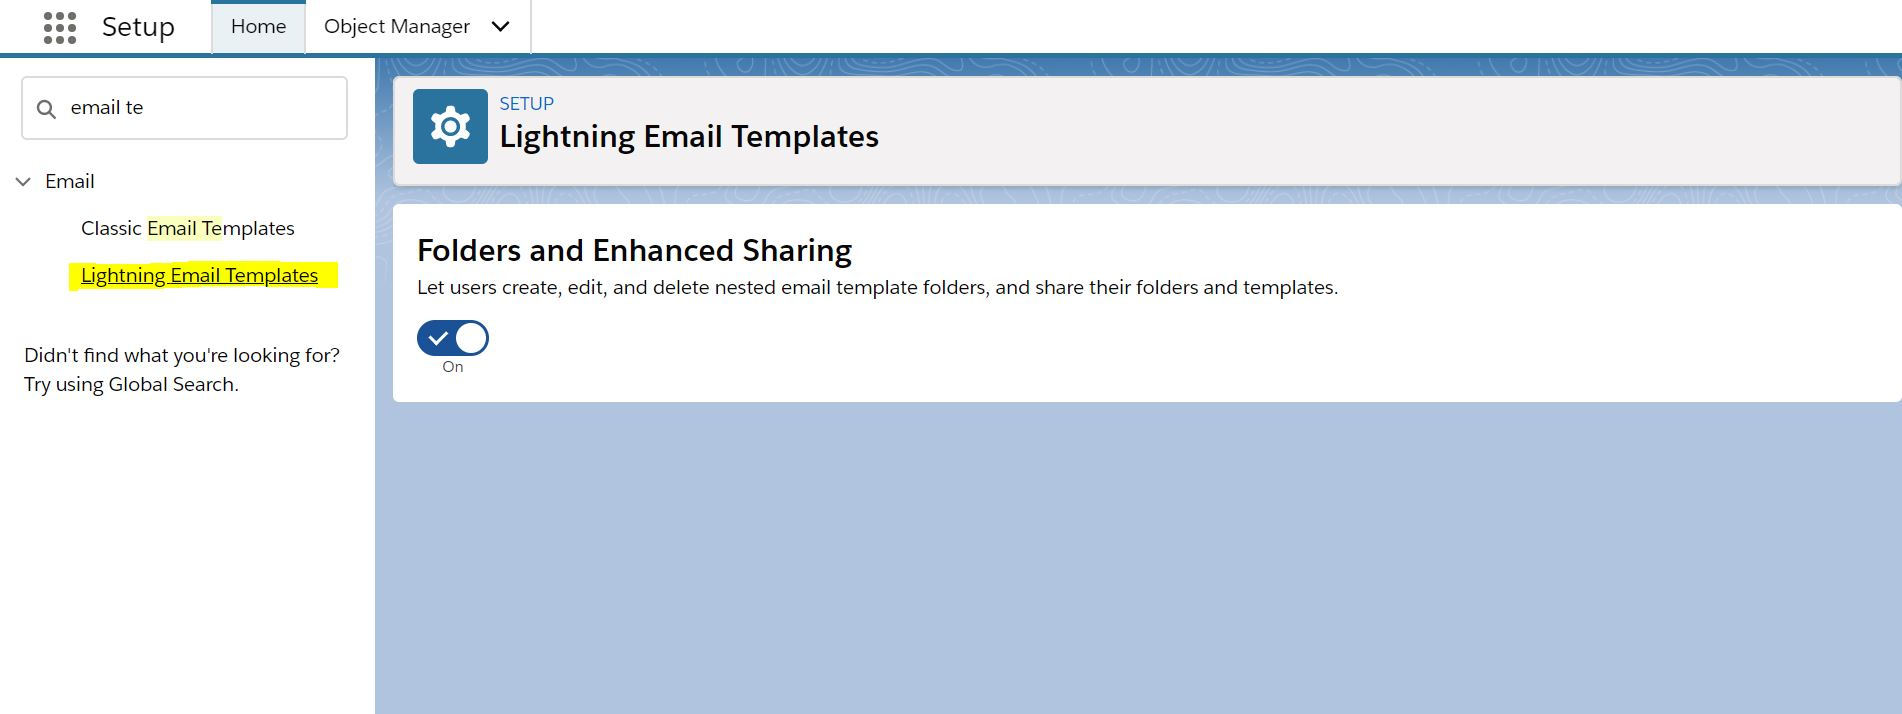 User With Manage Public Lightning Email Templates Can Not Create Email 